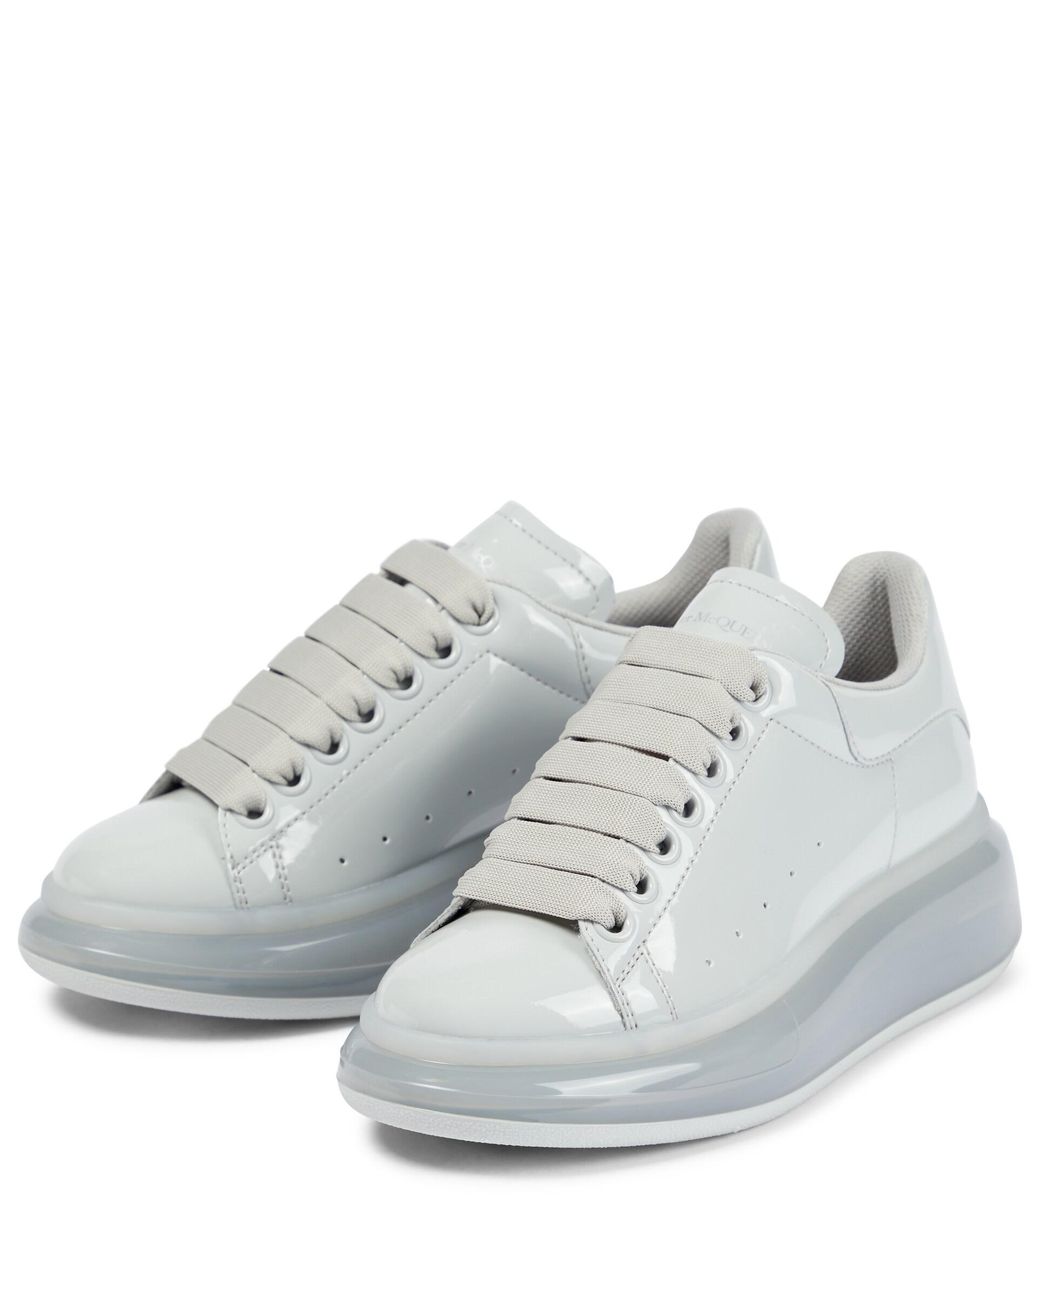 Alexander McQueen Faux Patent Leather Sneakers in White | Lyst